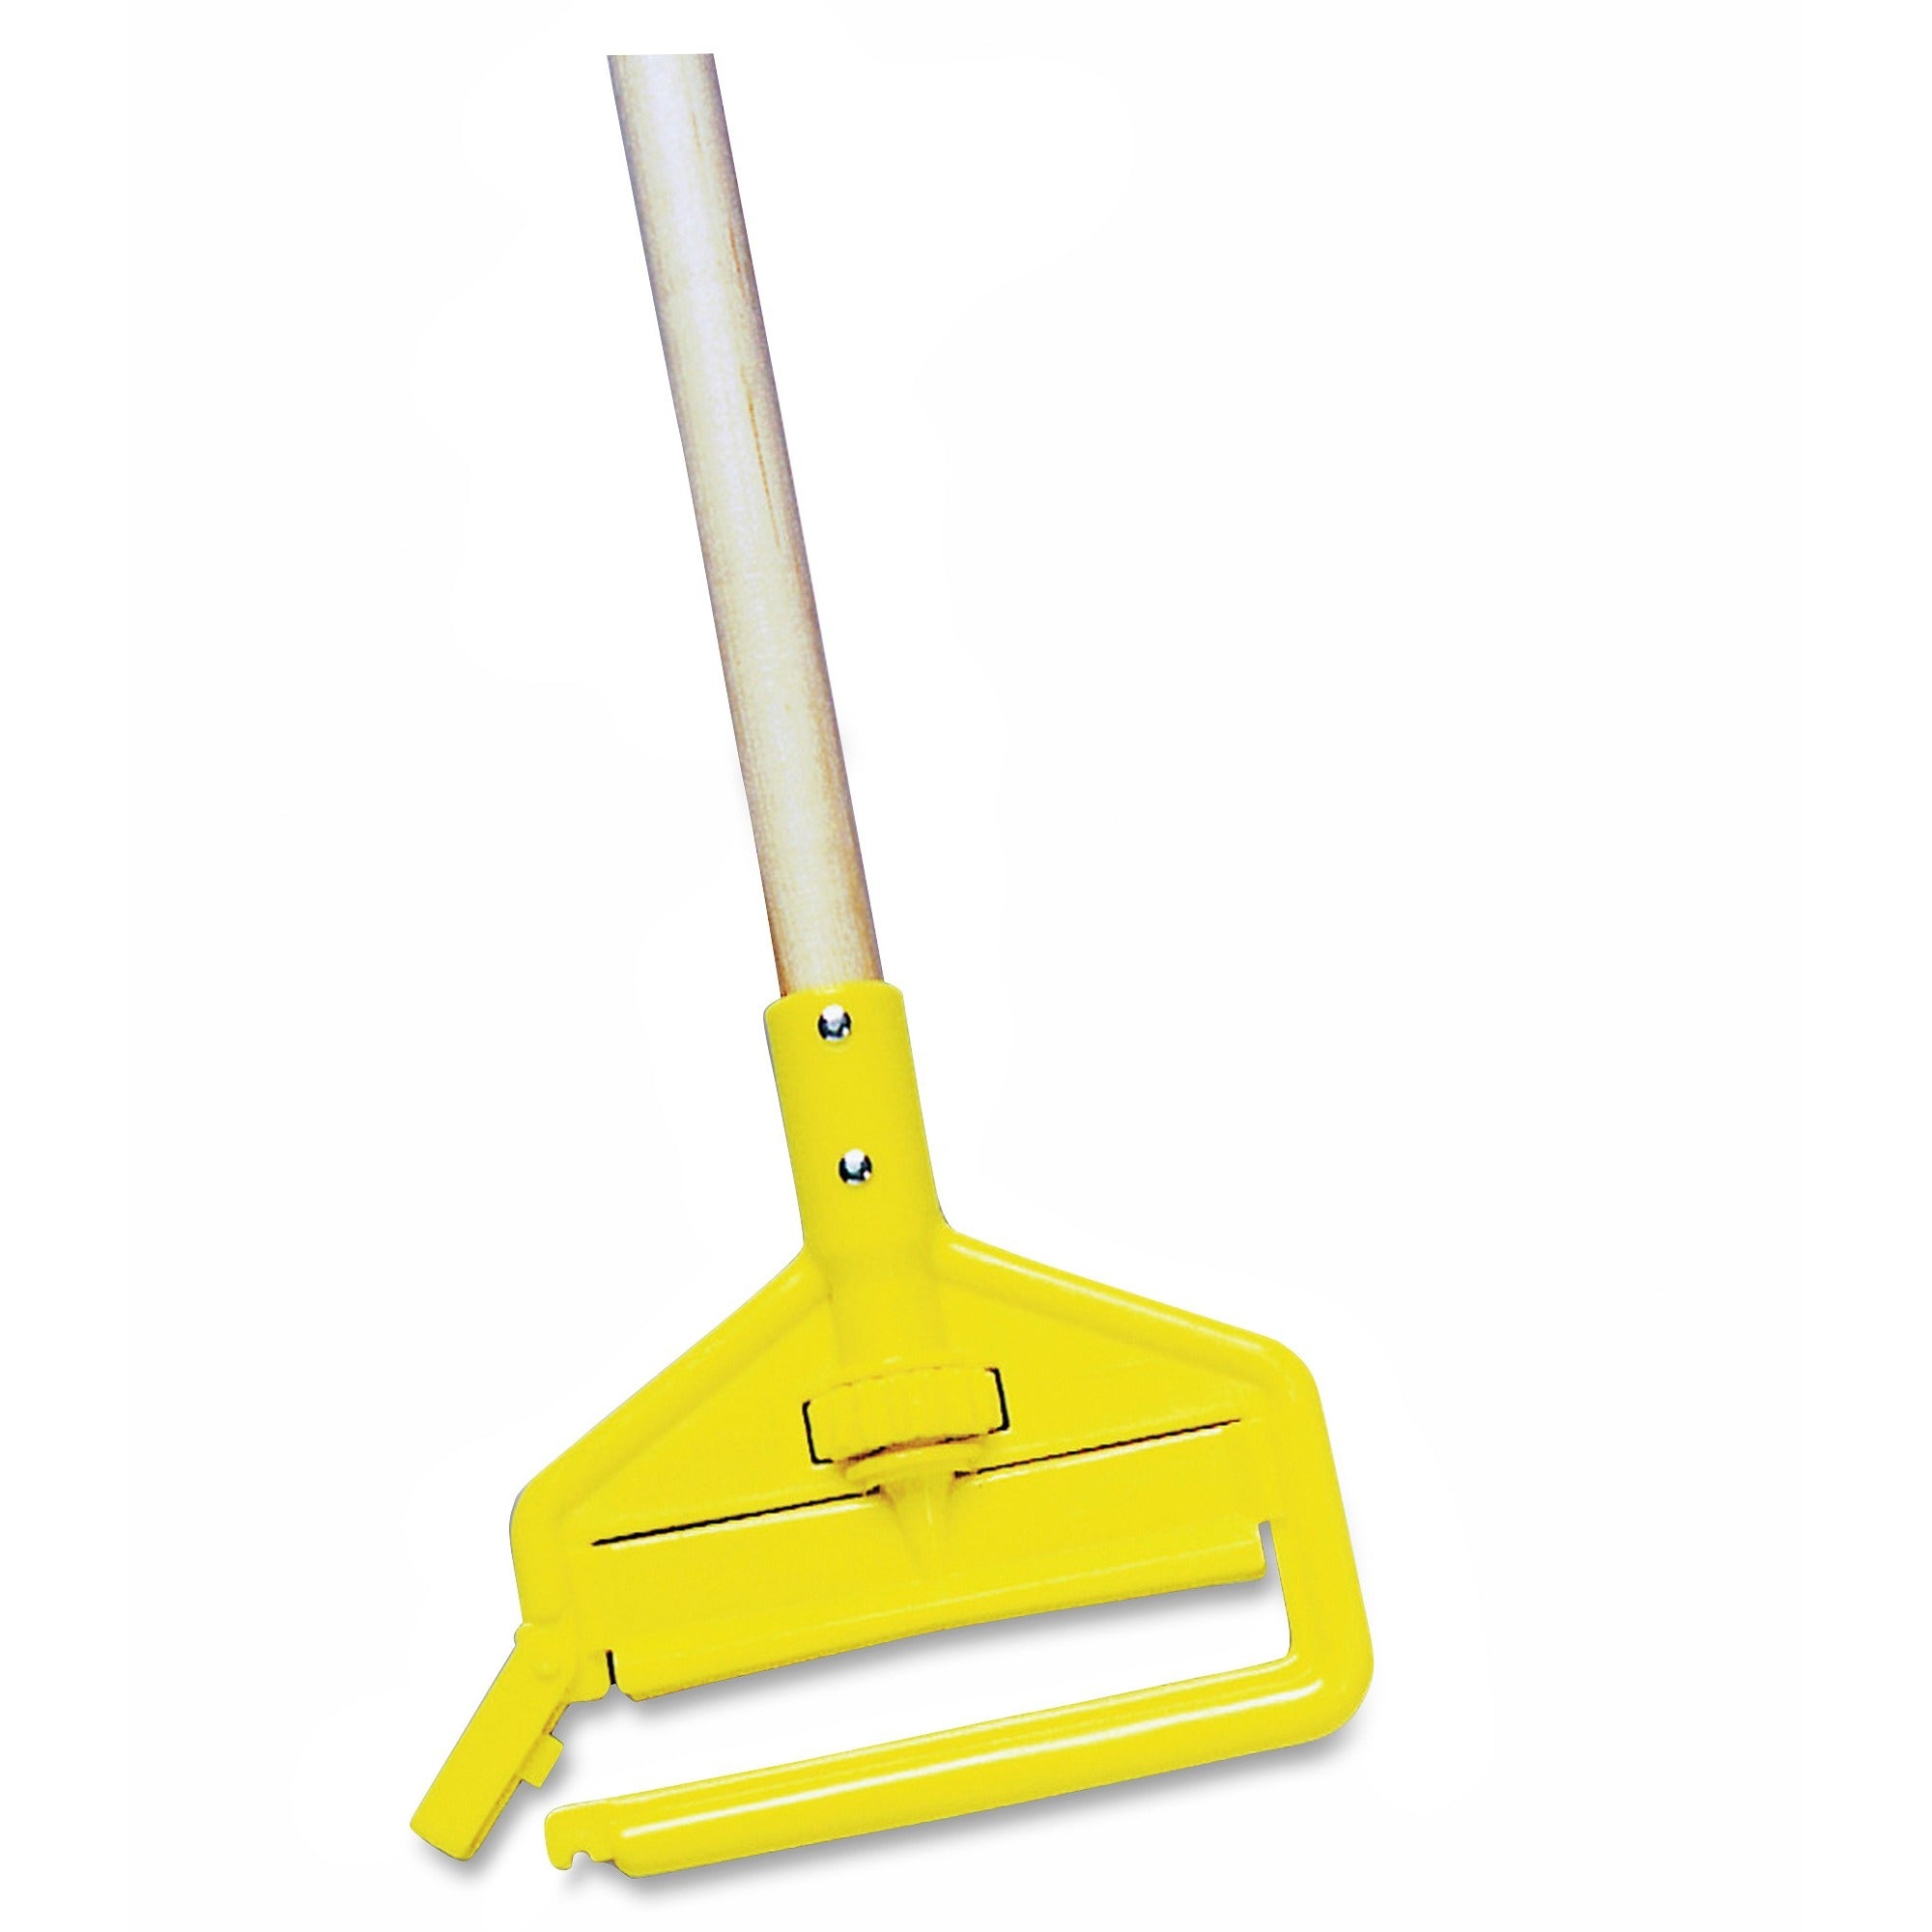 Rubbermaid Commercial 60" Invader Wet Mop Handle - 60" Length - Yellow - Hardwood - 1 Each - 